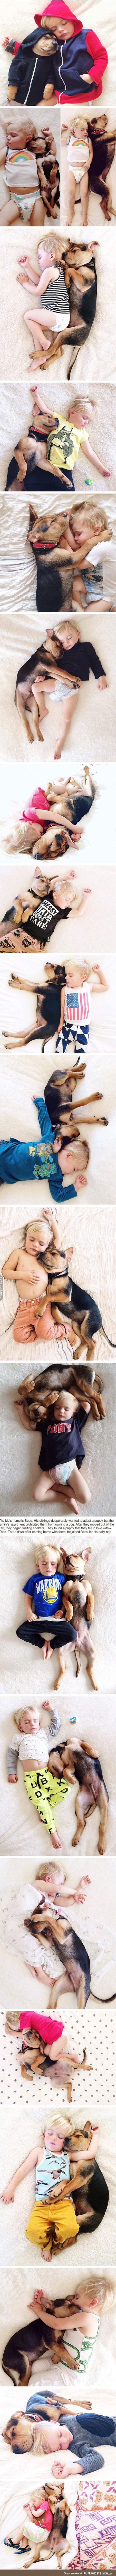 This toddler napping with his best friend